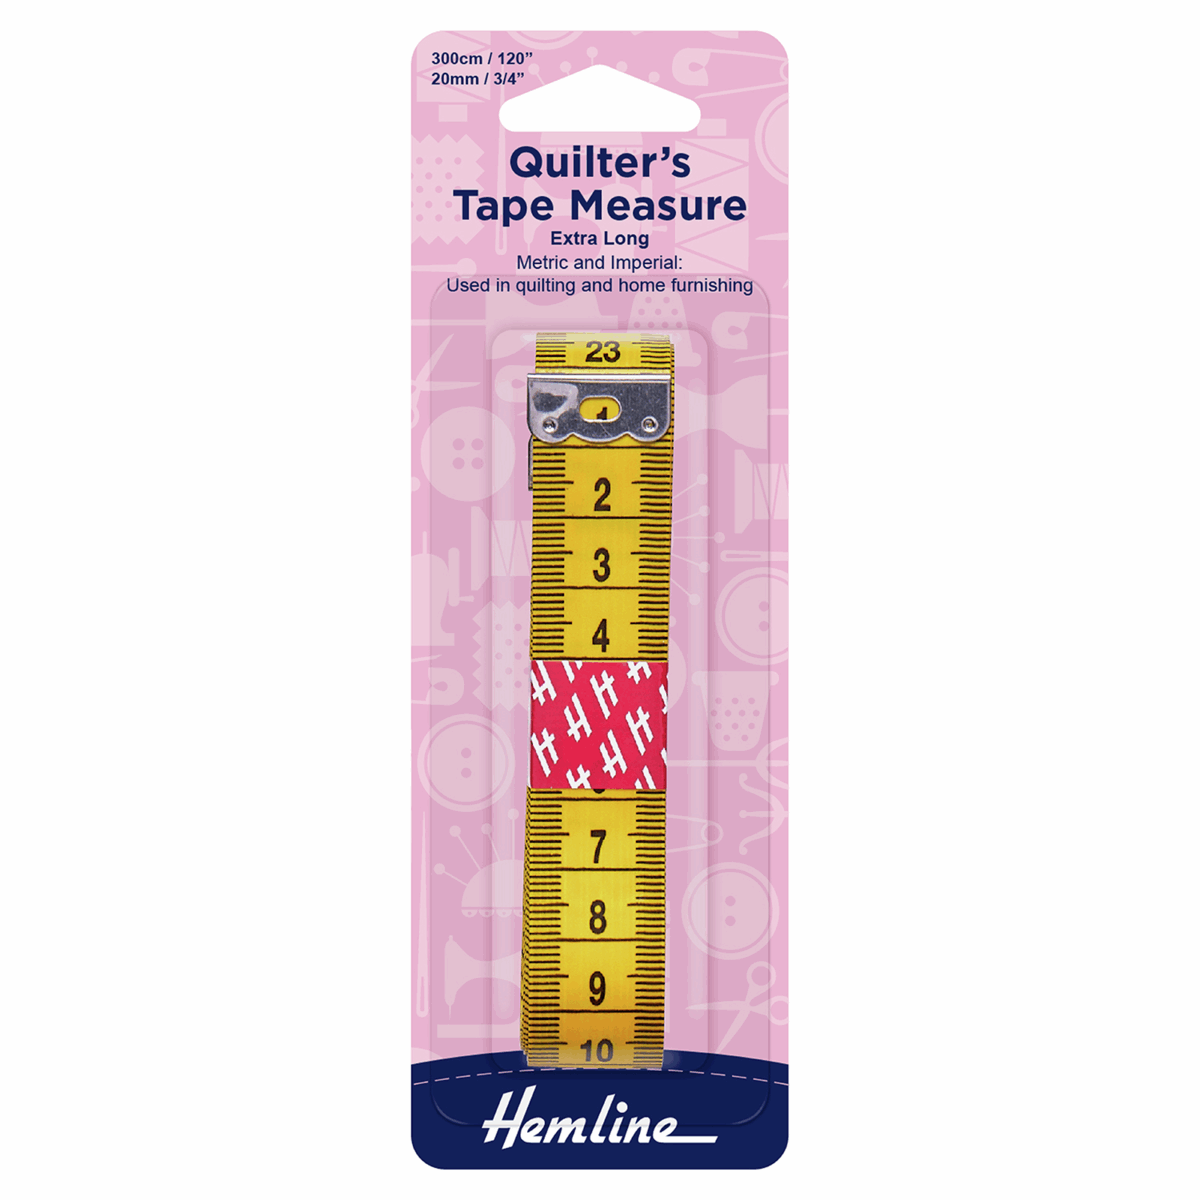 Quilter's Tape Measure - Extra Long